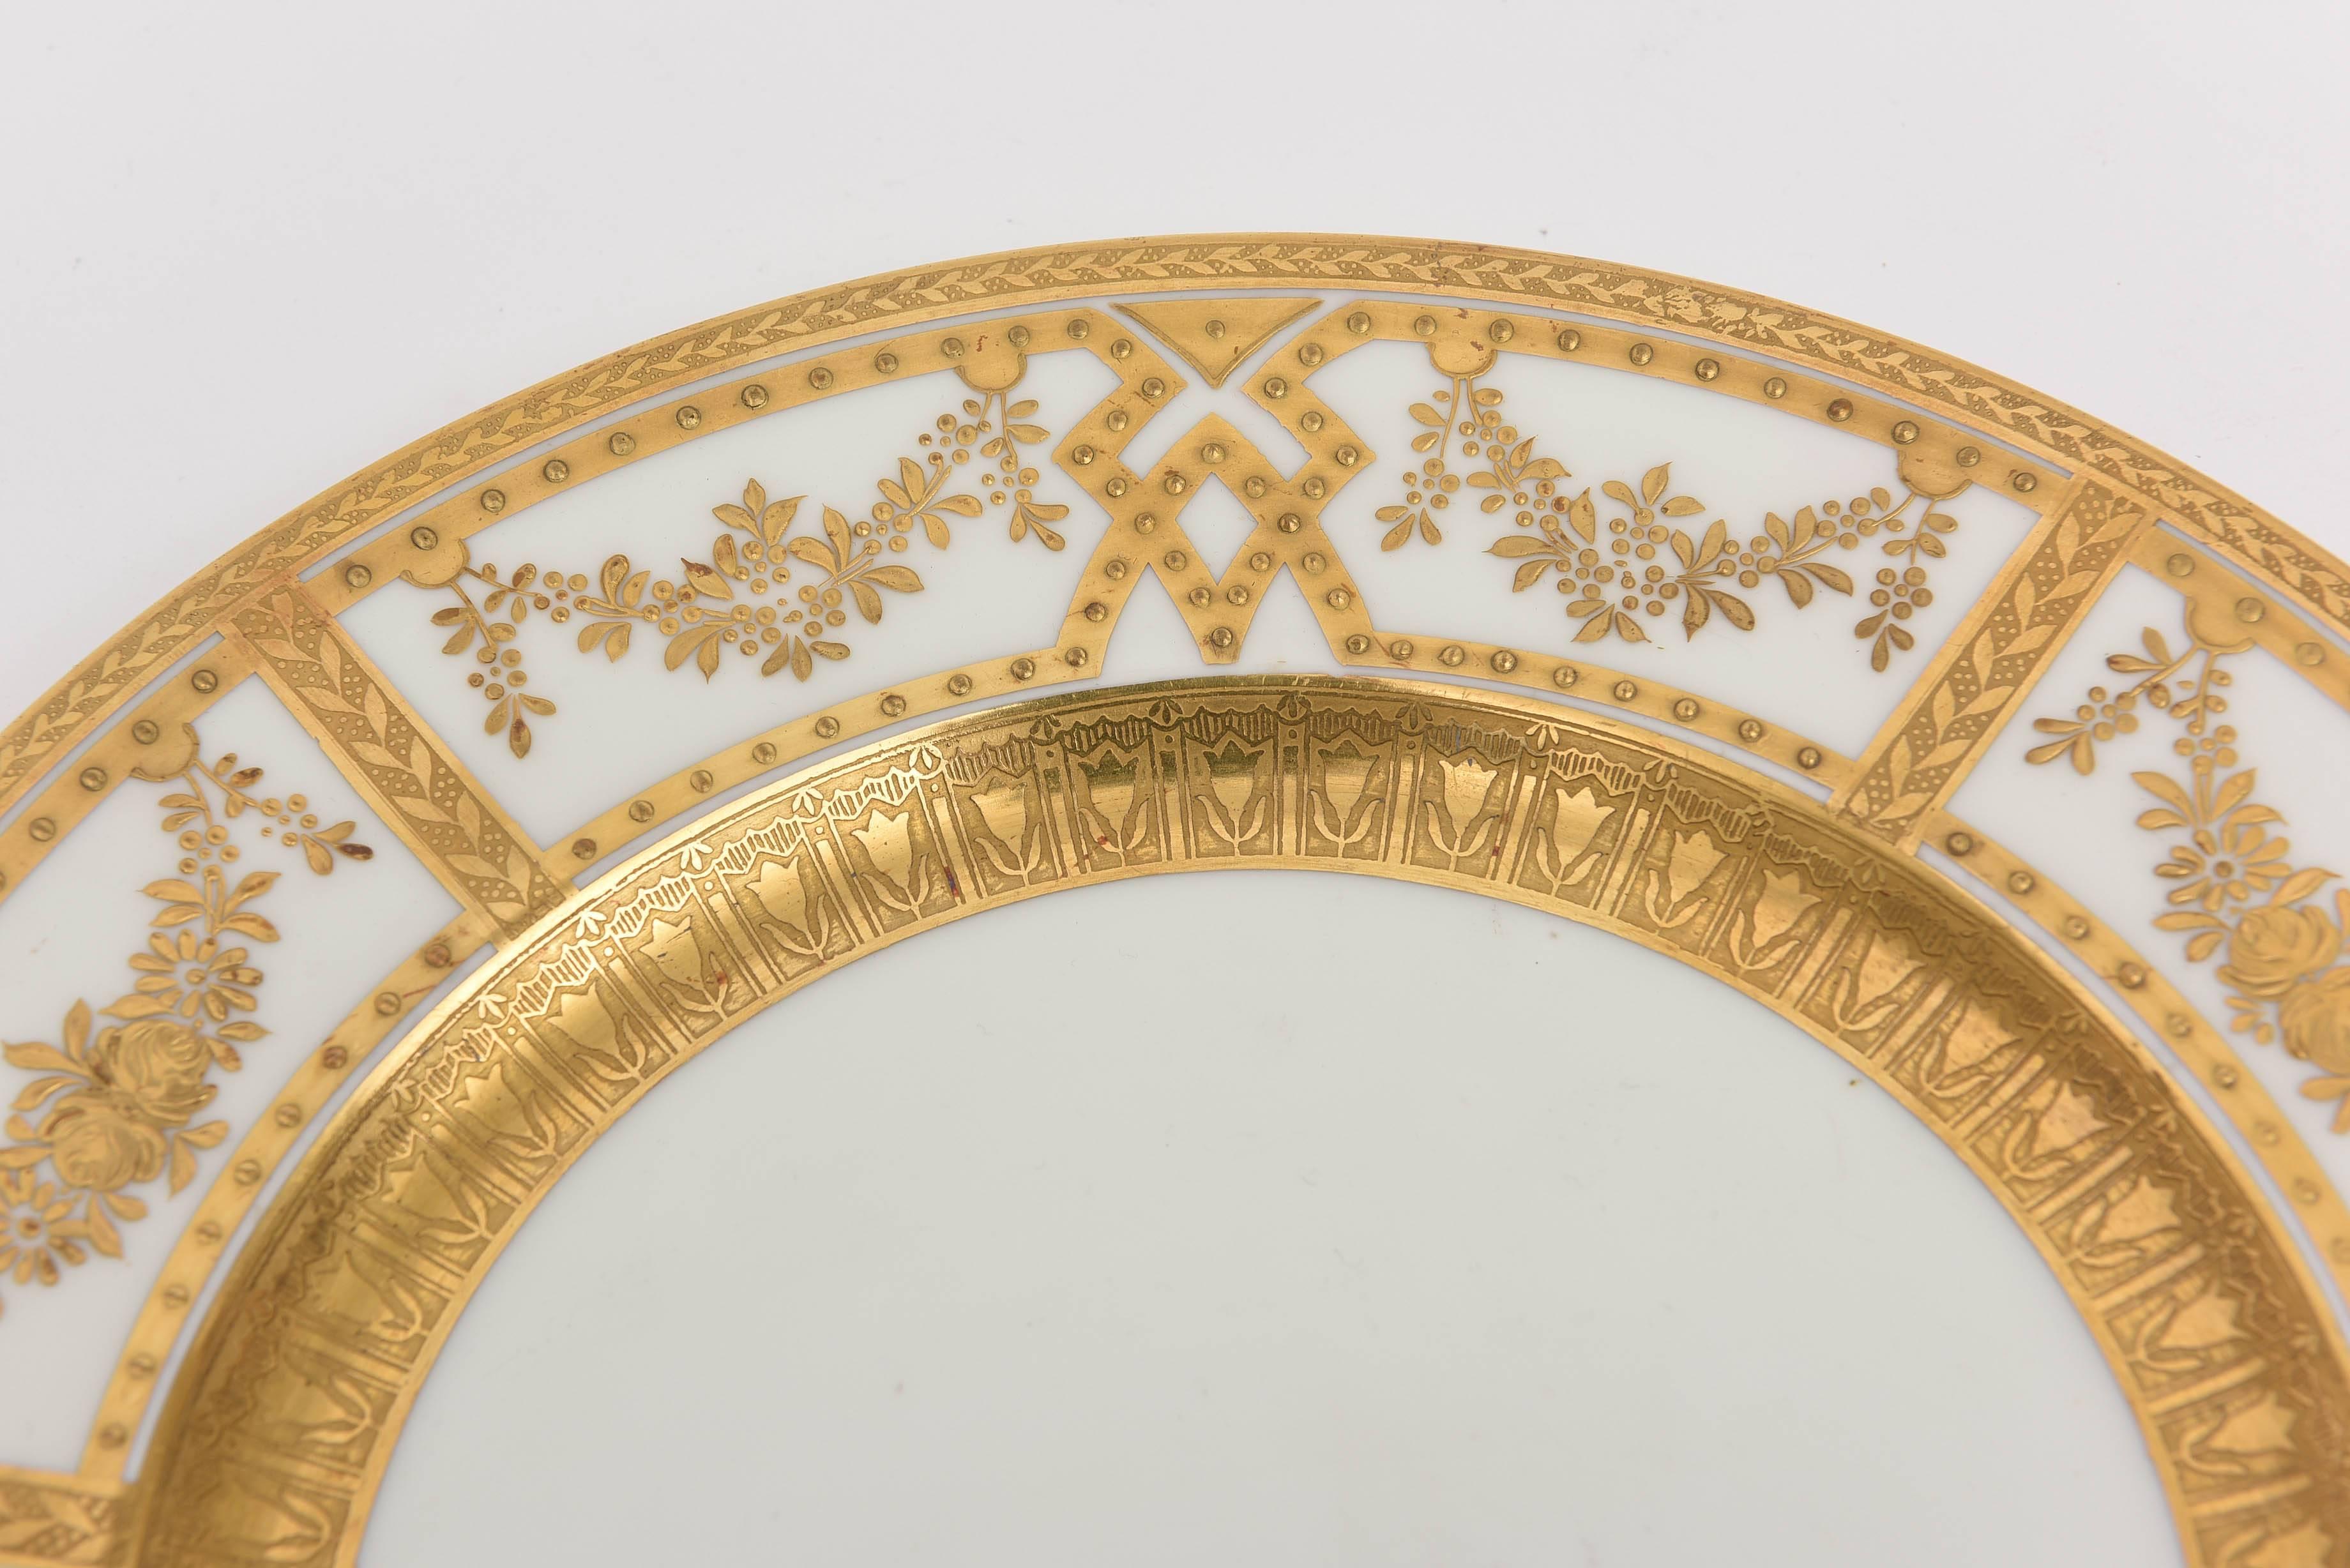 A wonderful custom set of 12 antique English dinner or presentation plates decorated by Crown Sutherland. Lots of hand tooled raised paste gilding in an elaborate design. Decorated on the under side with 24-karat gold also ! Wonderful antique